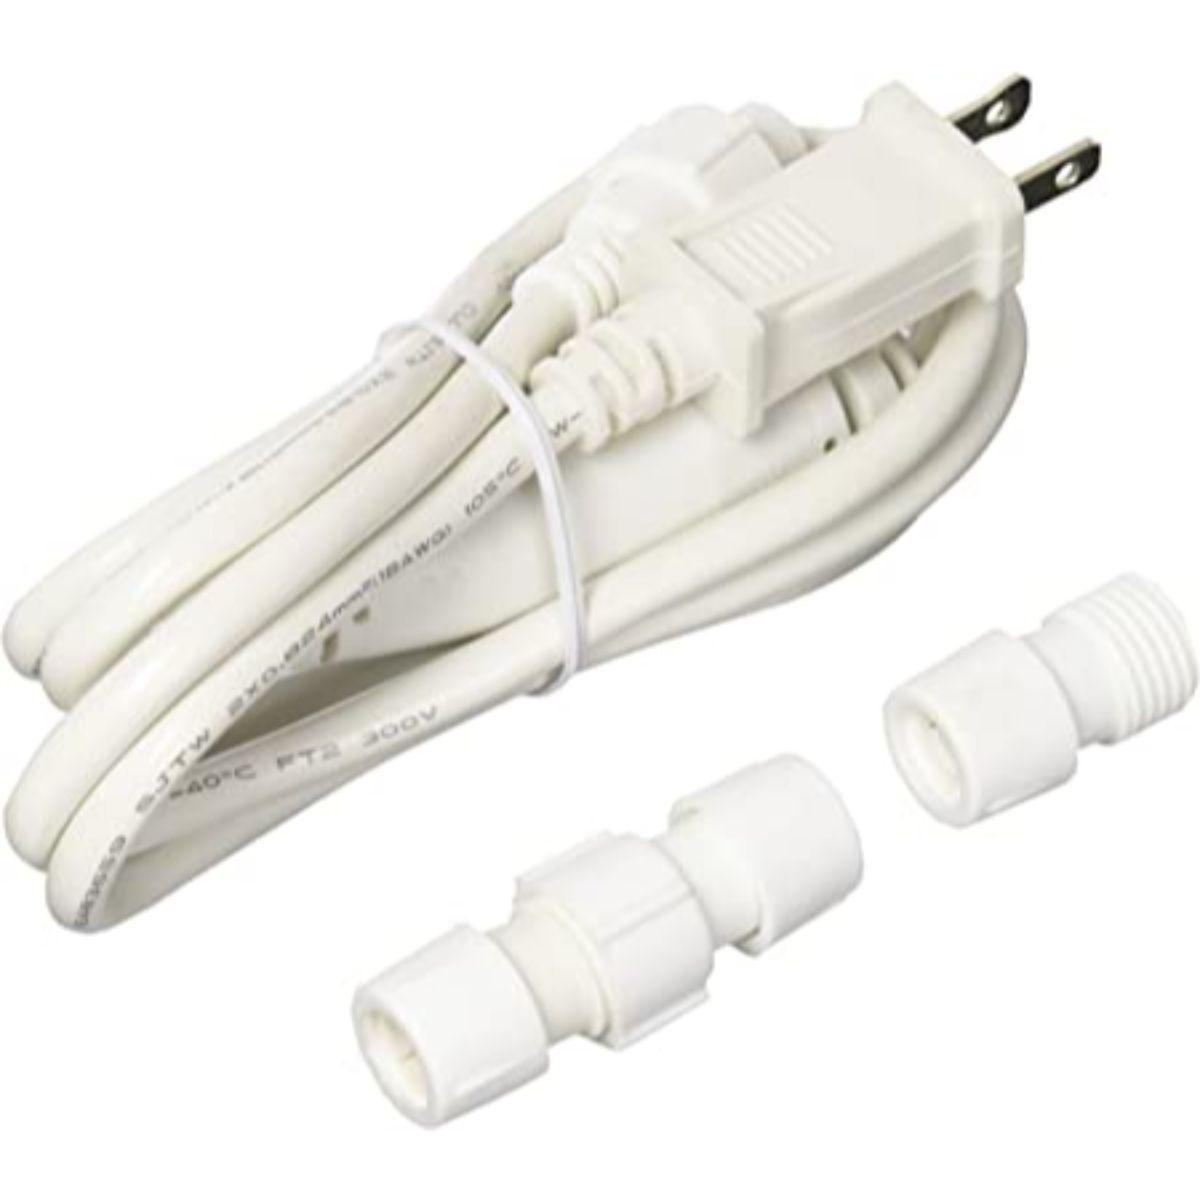 Flexbrite 5ft Power Connection Kit with Plug - Bees Lighting